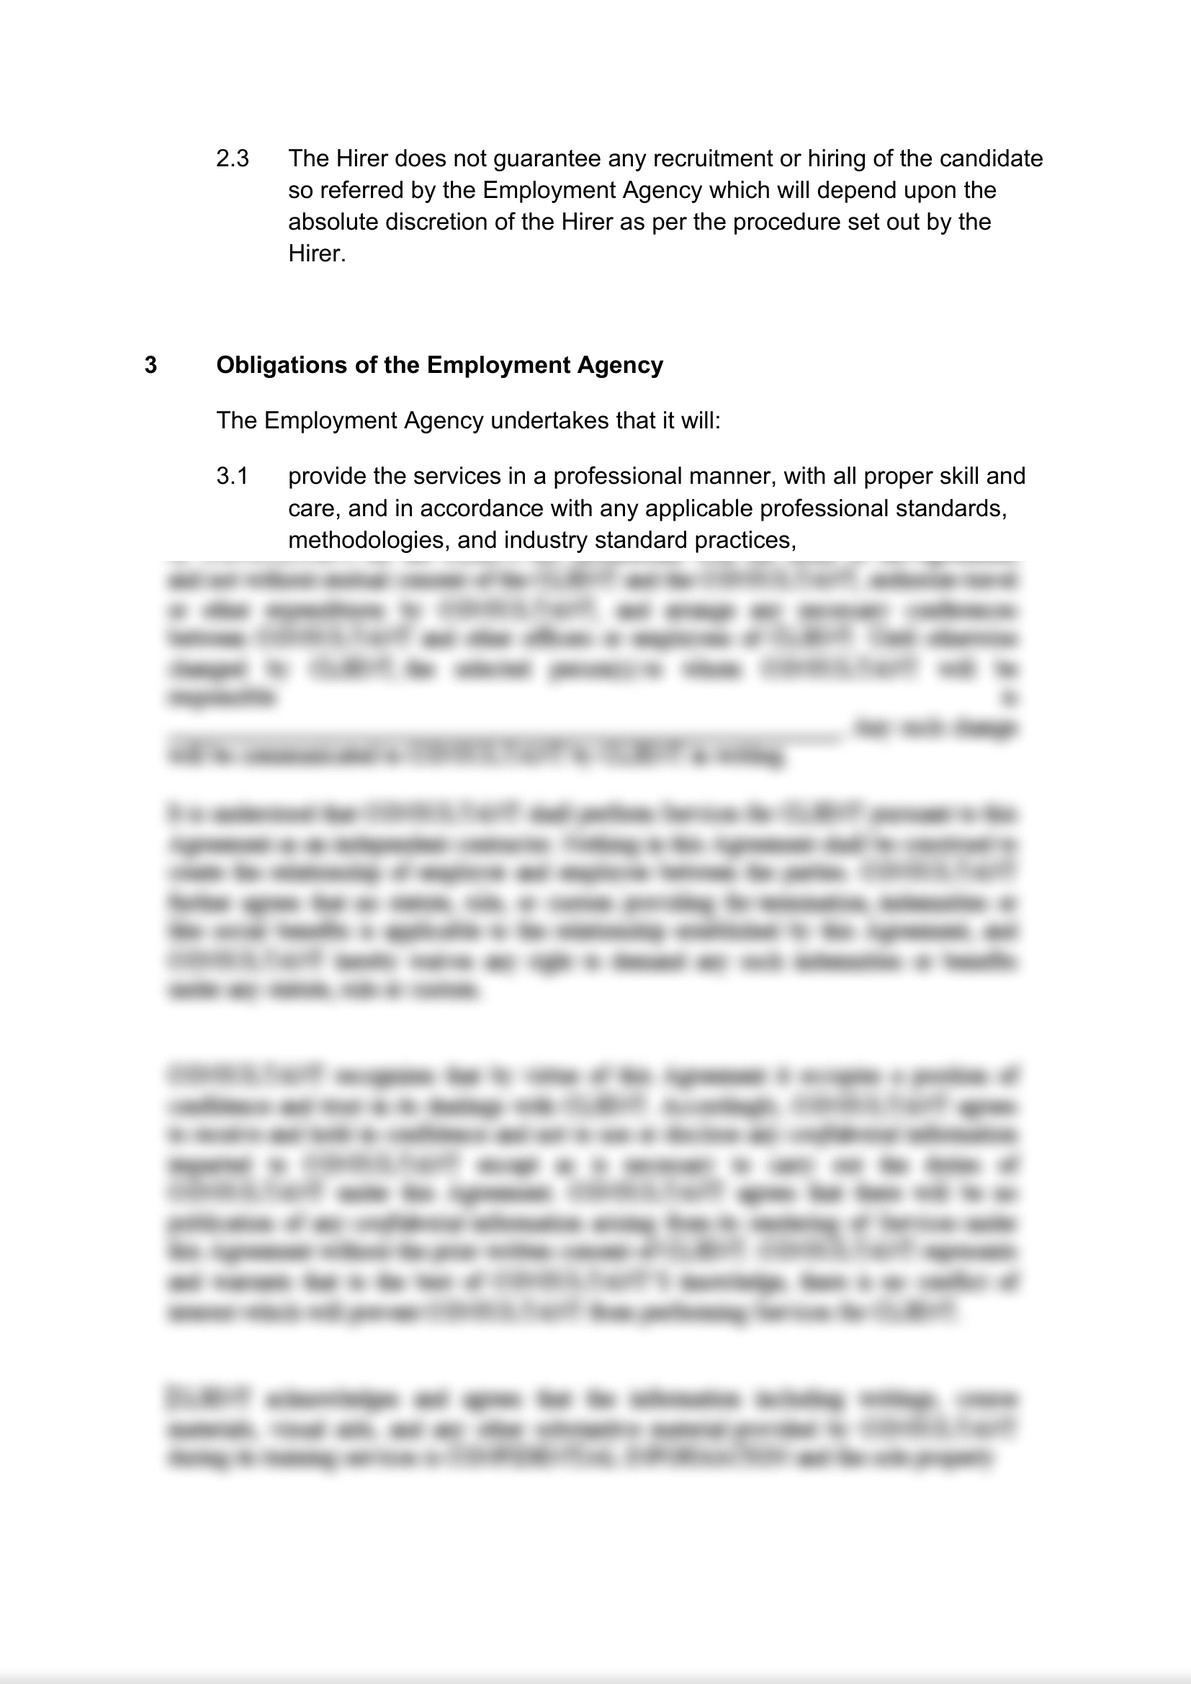 Employment agency agreement: client's version-2